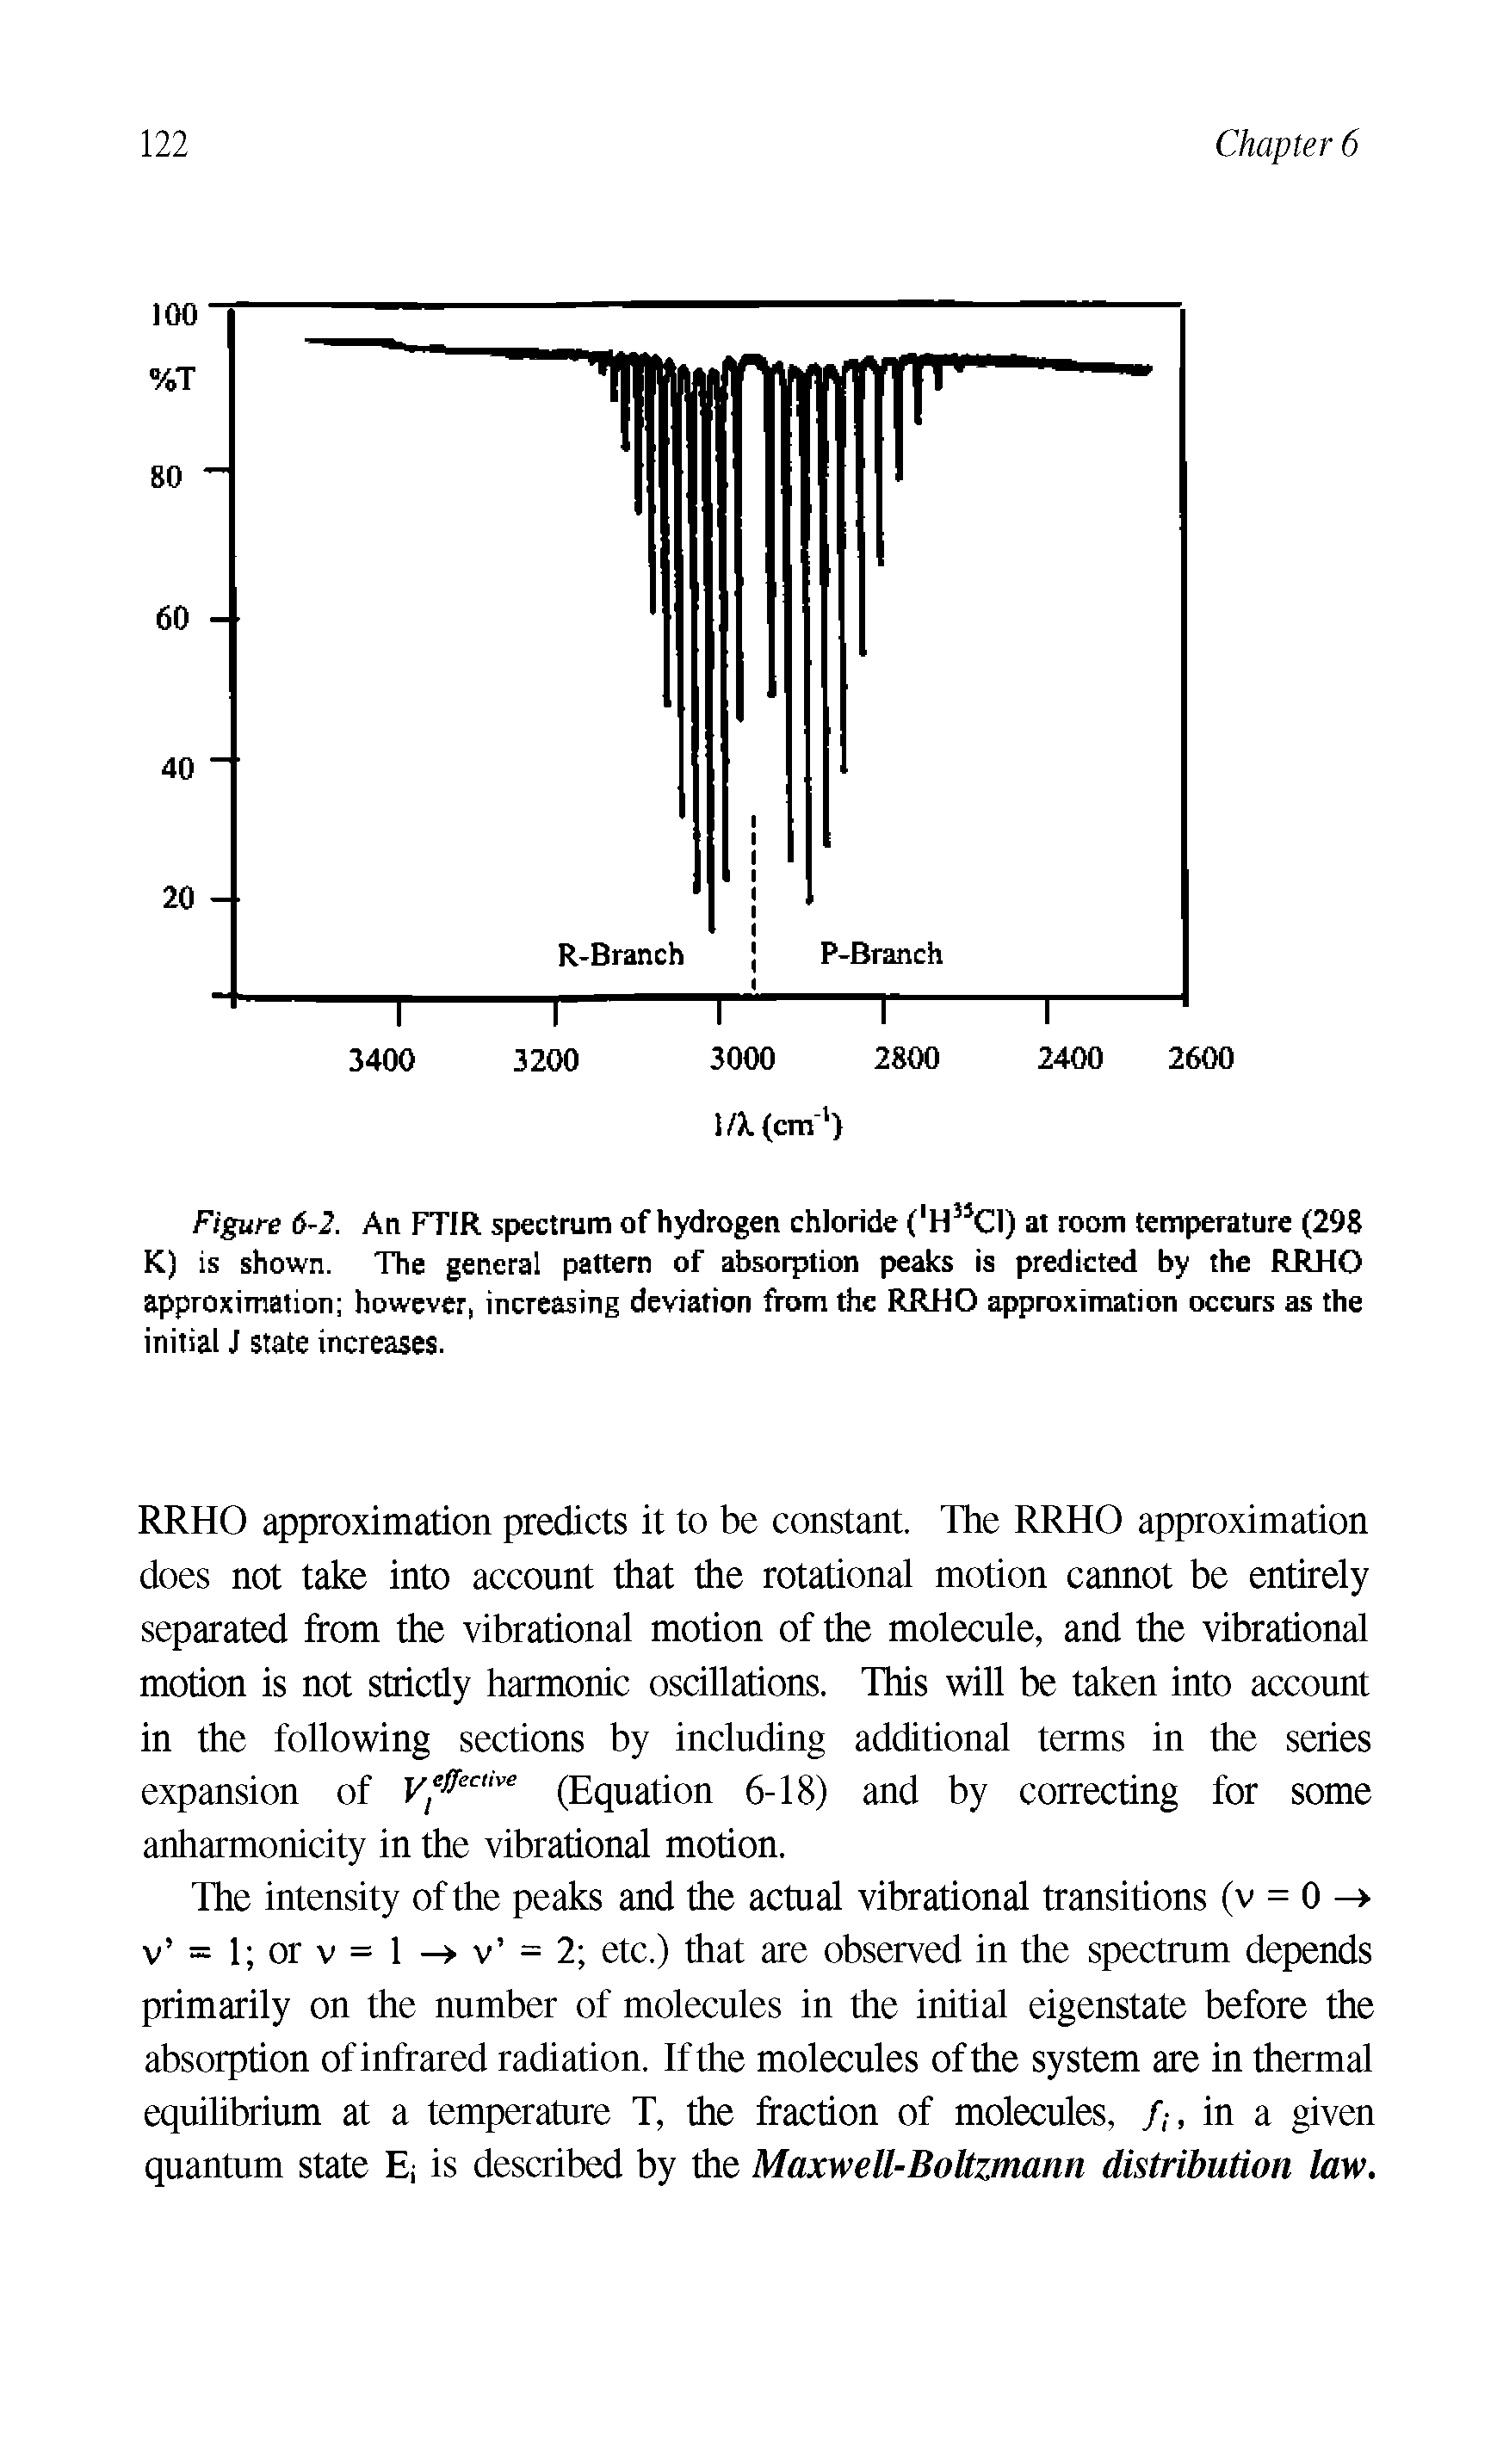 Figure 6 2. An FTIR spectrum of hydrogen chloride ( H C1) at room temperature (298 K) is shown. The general pattern of absorption peaks is predicted by the RRHO approximation however, increasing deviation from the RRHO approximation occurs as the initial J state increases.